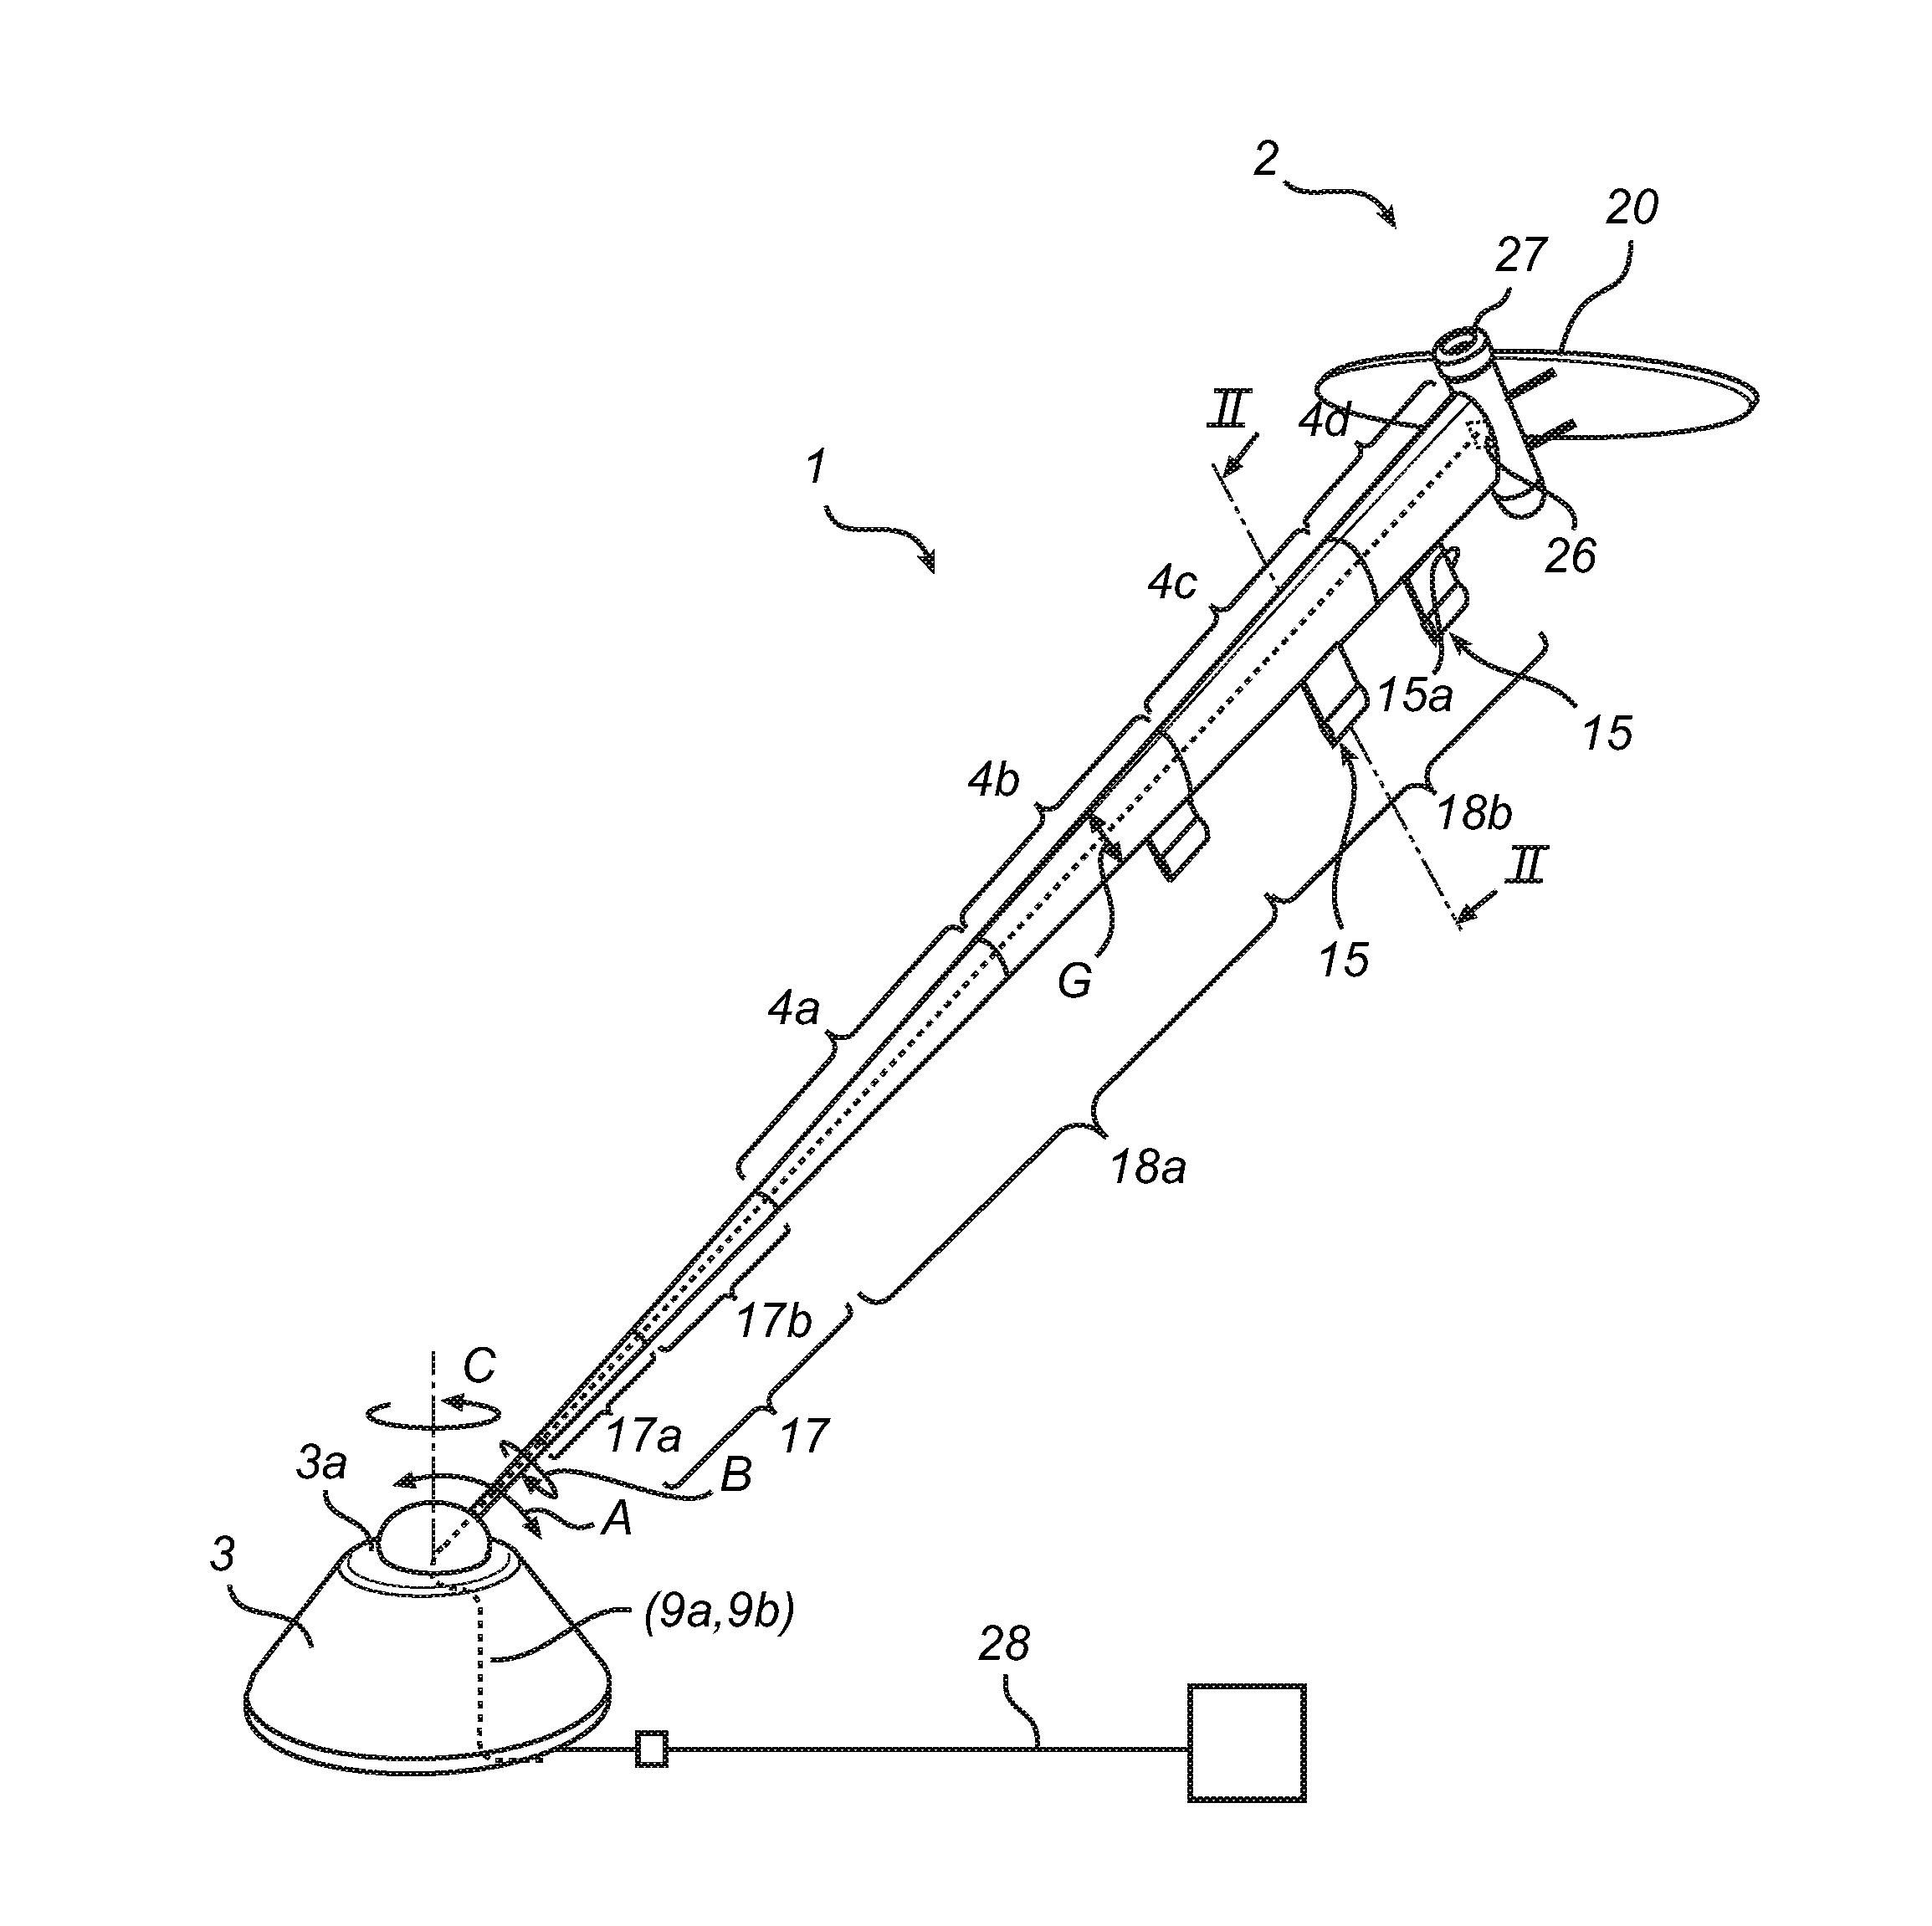 Tether for submerged moving vehicle